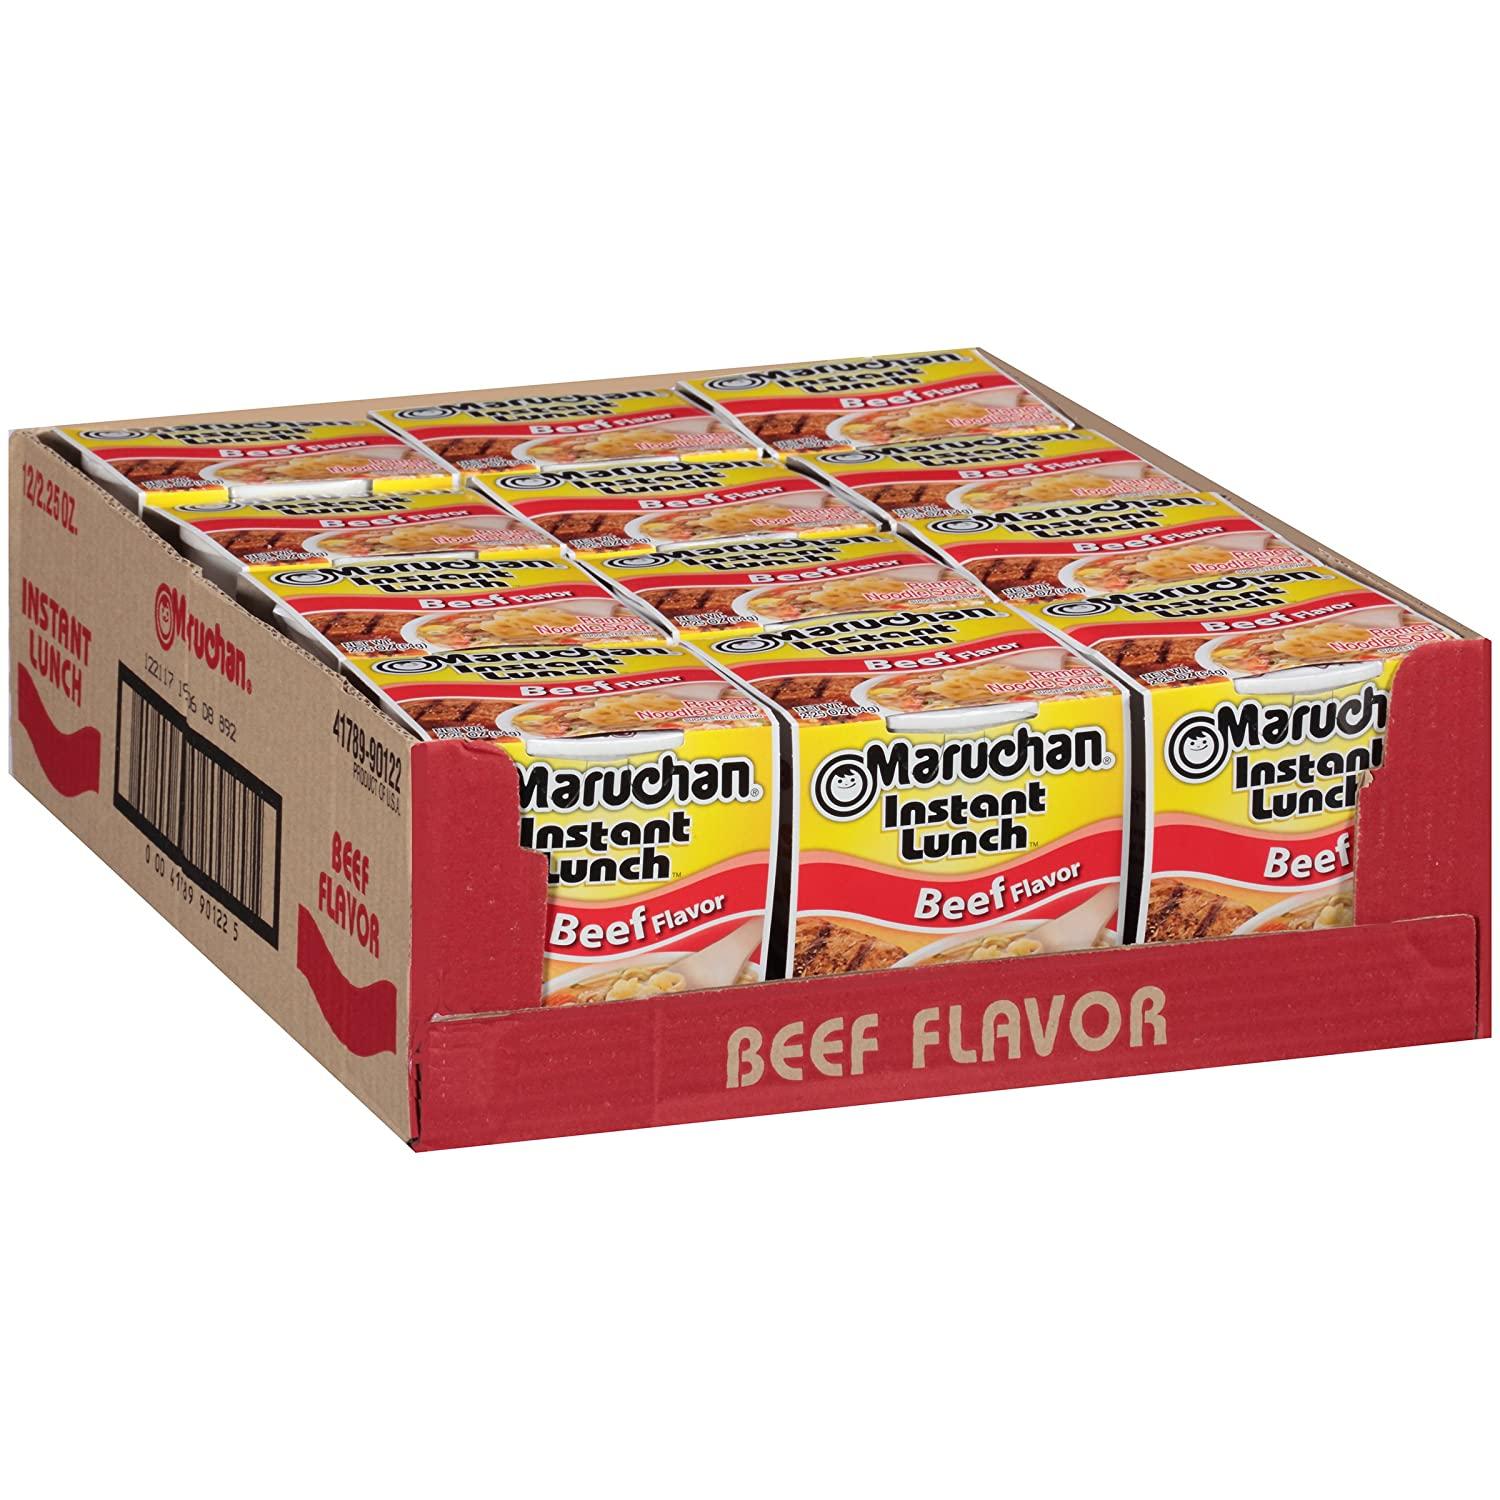 12 Maruchan Instant Lunch Beef Cup Noodles for $4.08 Shipped